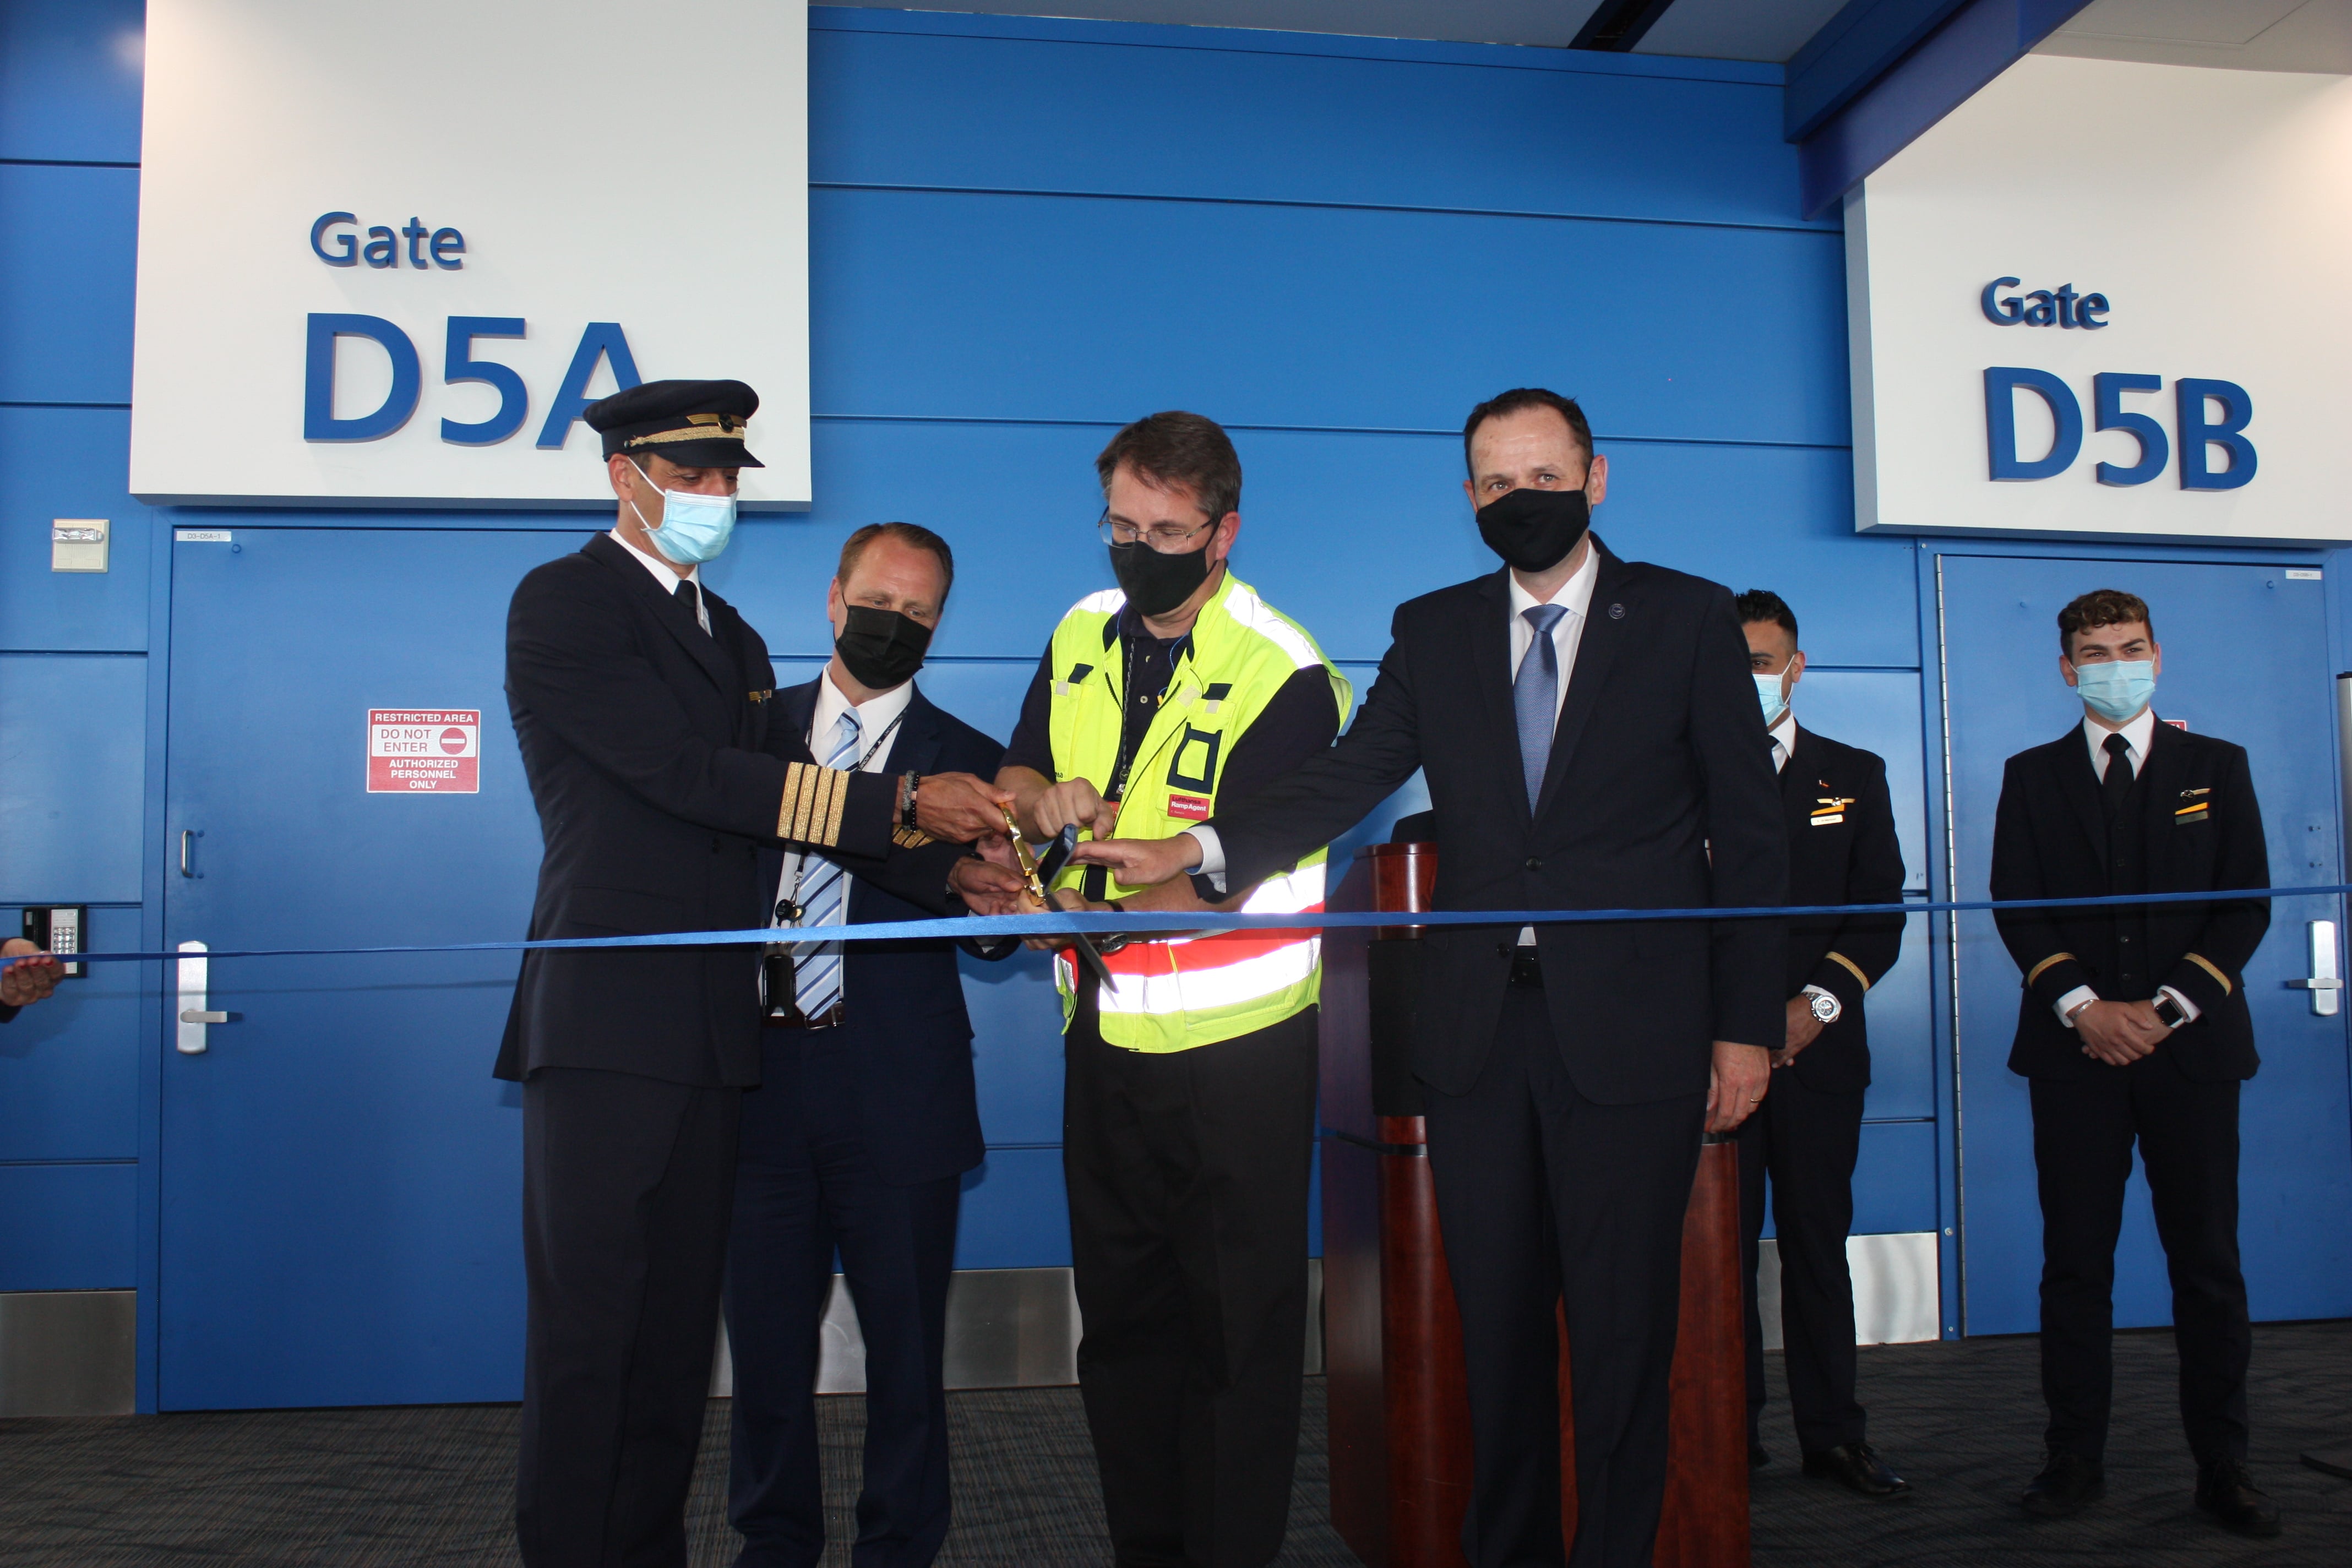 Ribbon-cutting ceremony at DTW to celebrate the resumption of intercontinental flights to and from Detroit to Frankfurt. Pictured l to r: Captain Gunnes (Lufthansa), Chad Newton (Wayne County Airport Authority), Chris Rampin (Lufthansa Station Manager), Frank Naeve (VP Sales, Lufthansa Group Passenger Airlines, The Americas)